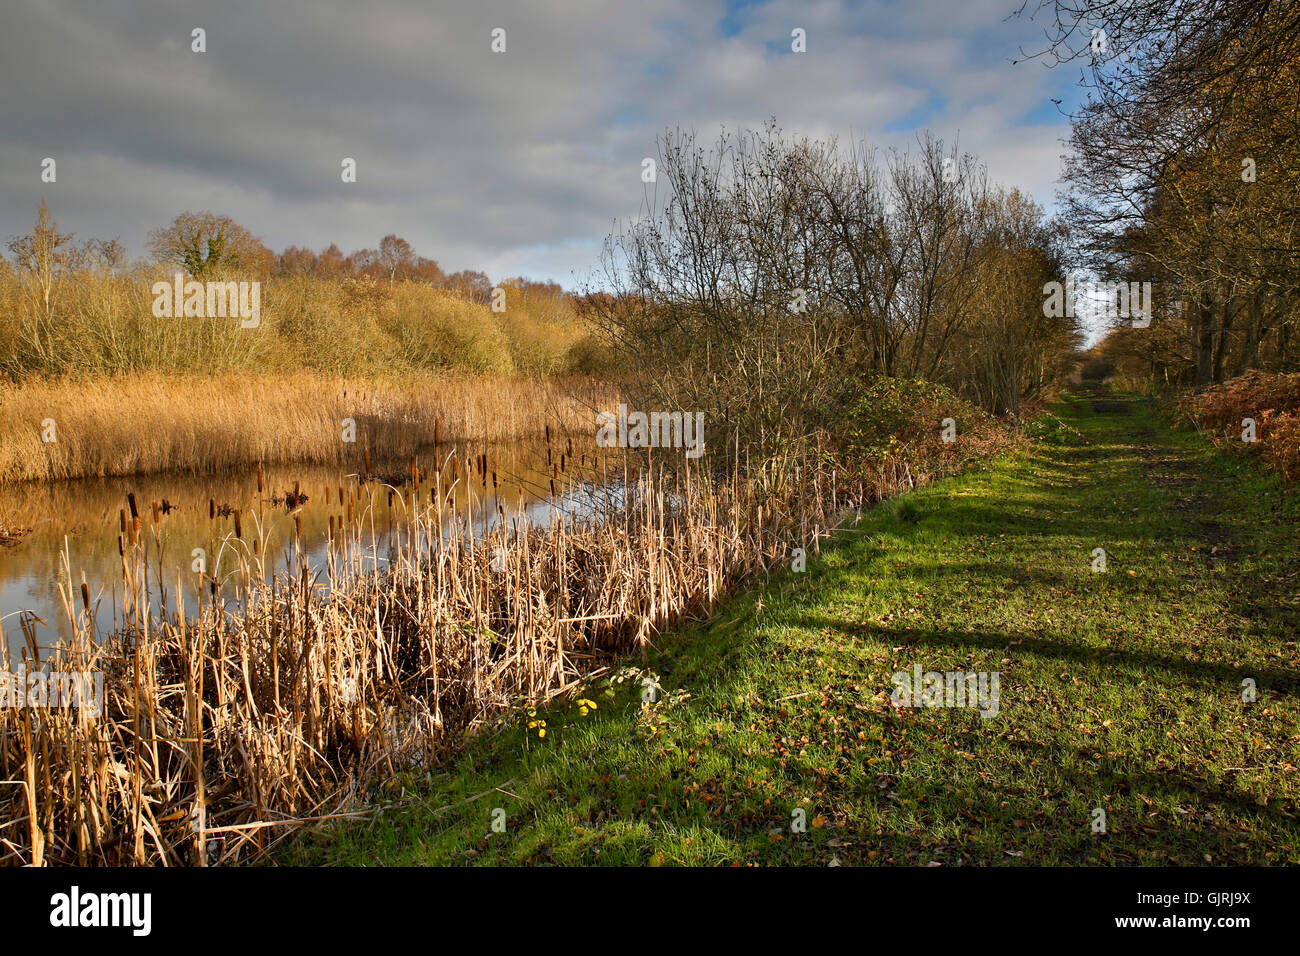 Westhay Moor Somerset Wildlife Trust, Royaume-Uni Banque D'Images